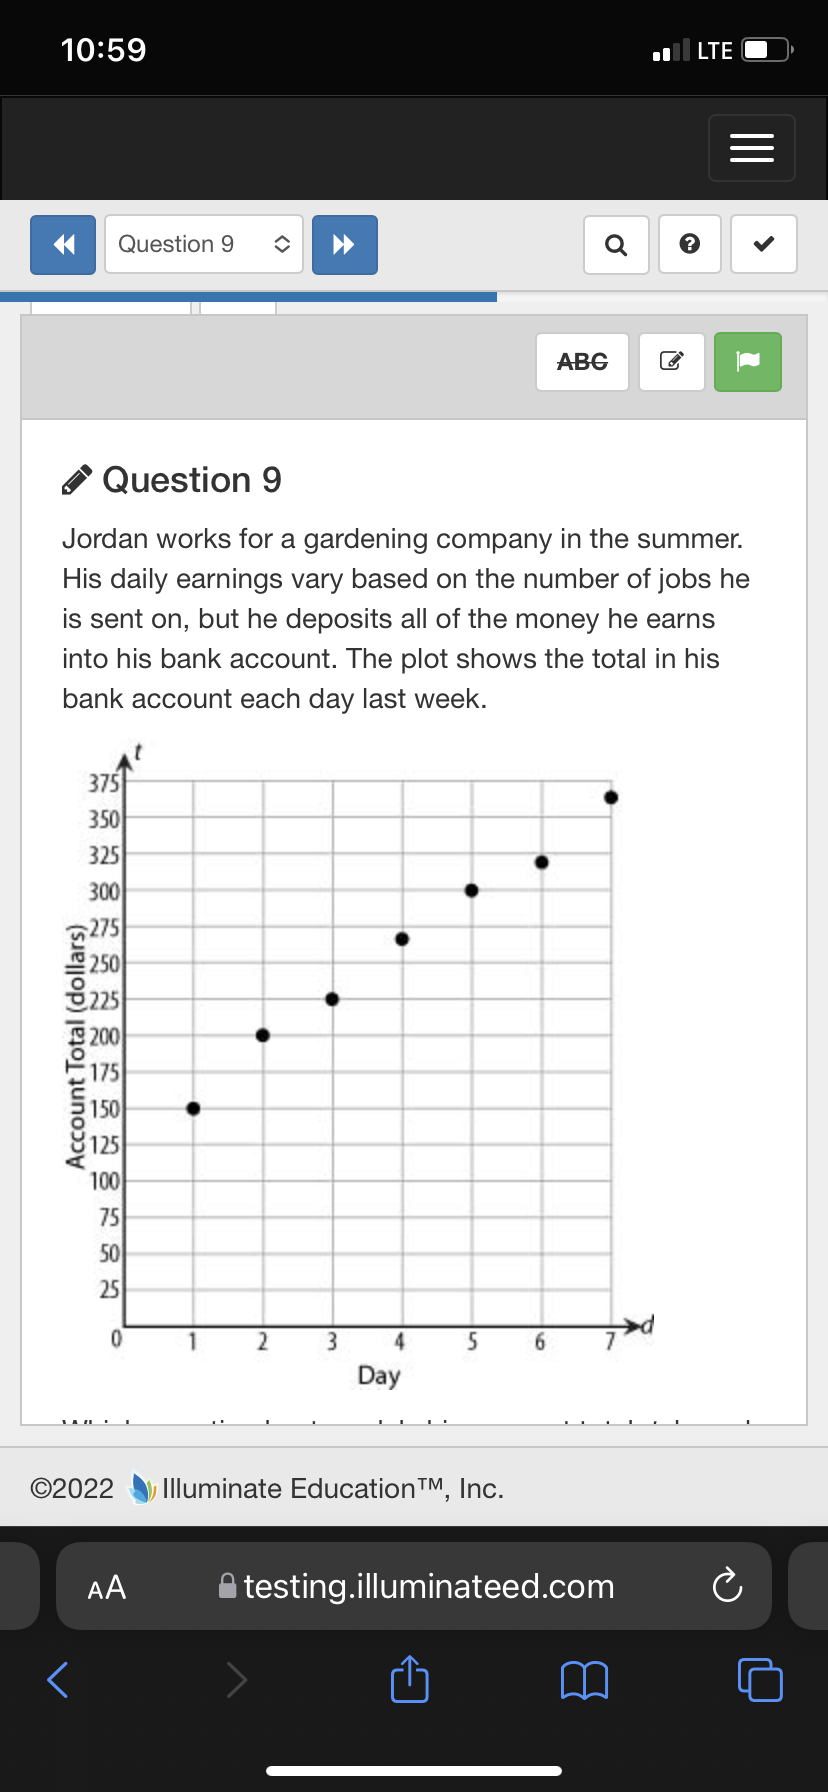 10:59
LTE
Question 9
Q
АBG
A Question 9
Jordan works for a gardening company in the summer.
His daily earnings vary based on the number of jobs he
is sent on, but he deposits all of the money he earns
into his bank account. The plot shows the total in his
bank account each day last week.
375
350
325
300
275
250
200
175
150
125
100
75
50
25
4
5
6.
Day
©2022
Illuminate EducationTM, Inc.
AA
testing.illuminateed.com
Account Total (dollars)
<>
